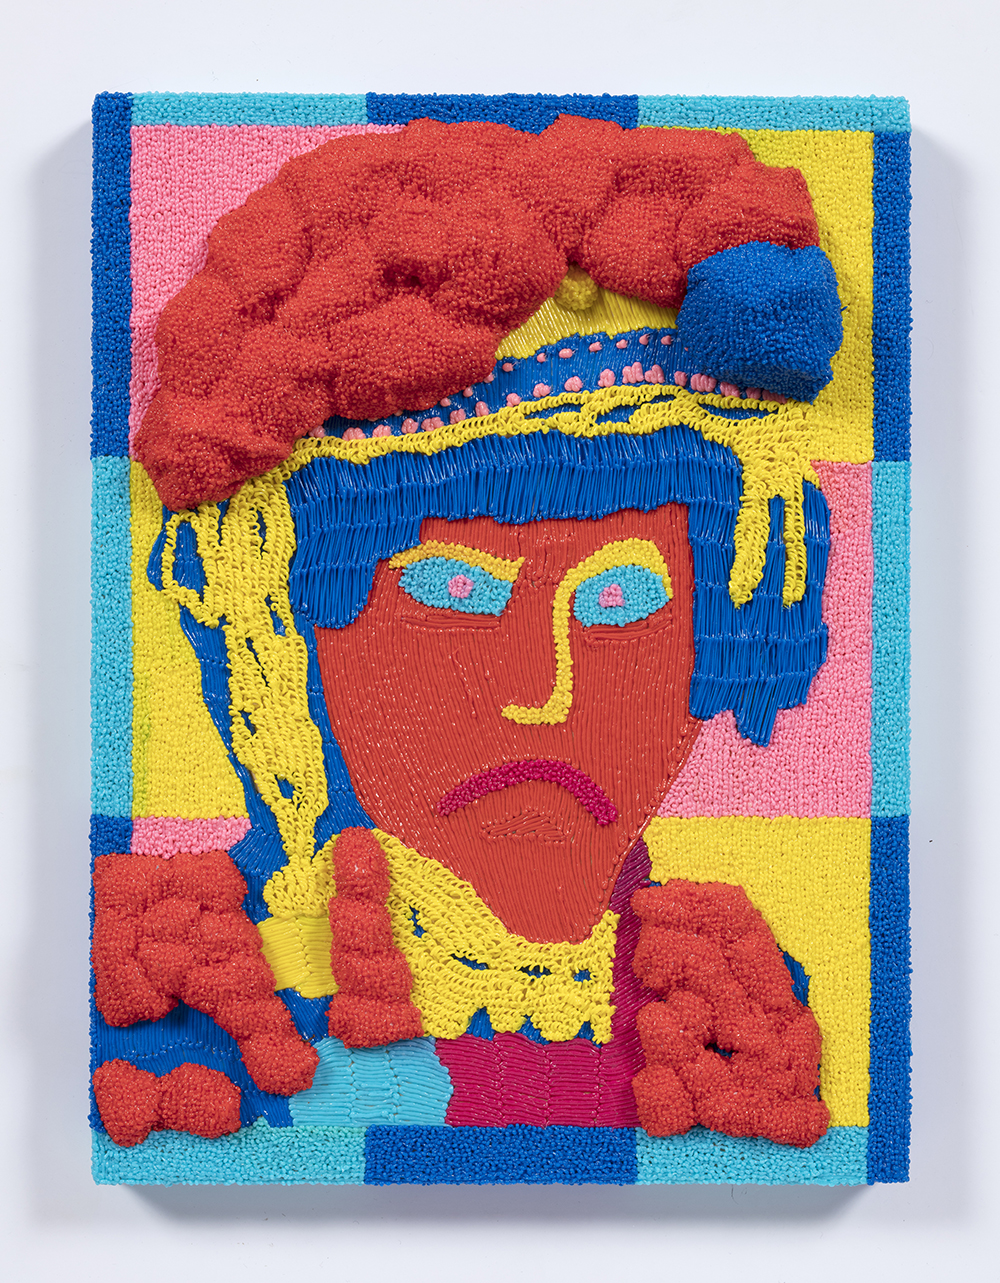 Dominic Dispirito. <em>Hell hath no fury like a pearly queen scorned</em>, 2018. Manually printed PLA plastic on board, 11 3/4 x 8 1/4 inches  (30 x 21 cm)